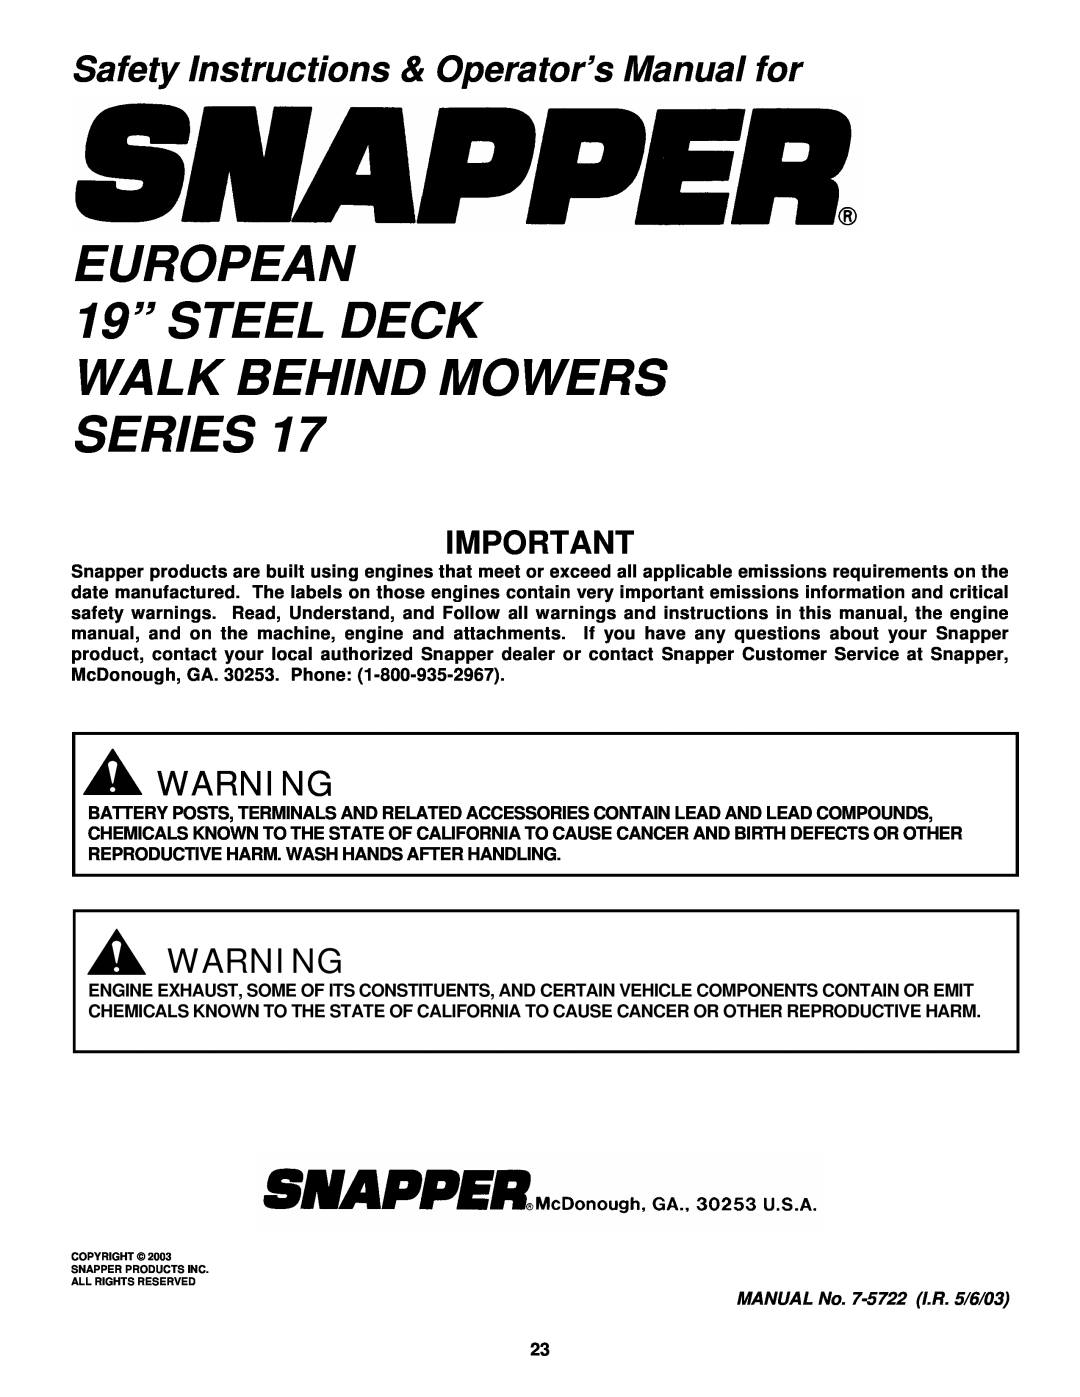 Snapper ER195517B EUROPEAN 19” STEEL DECK WALK BEHIND MOWERS SERIES, Safety Instructions & Operator’s Manual for 